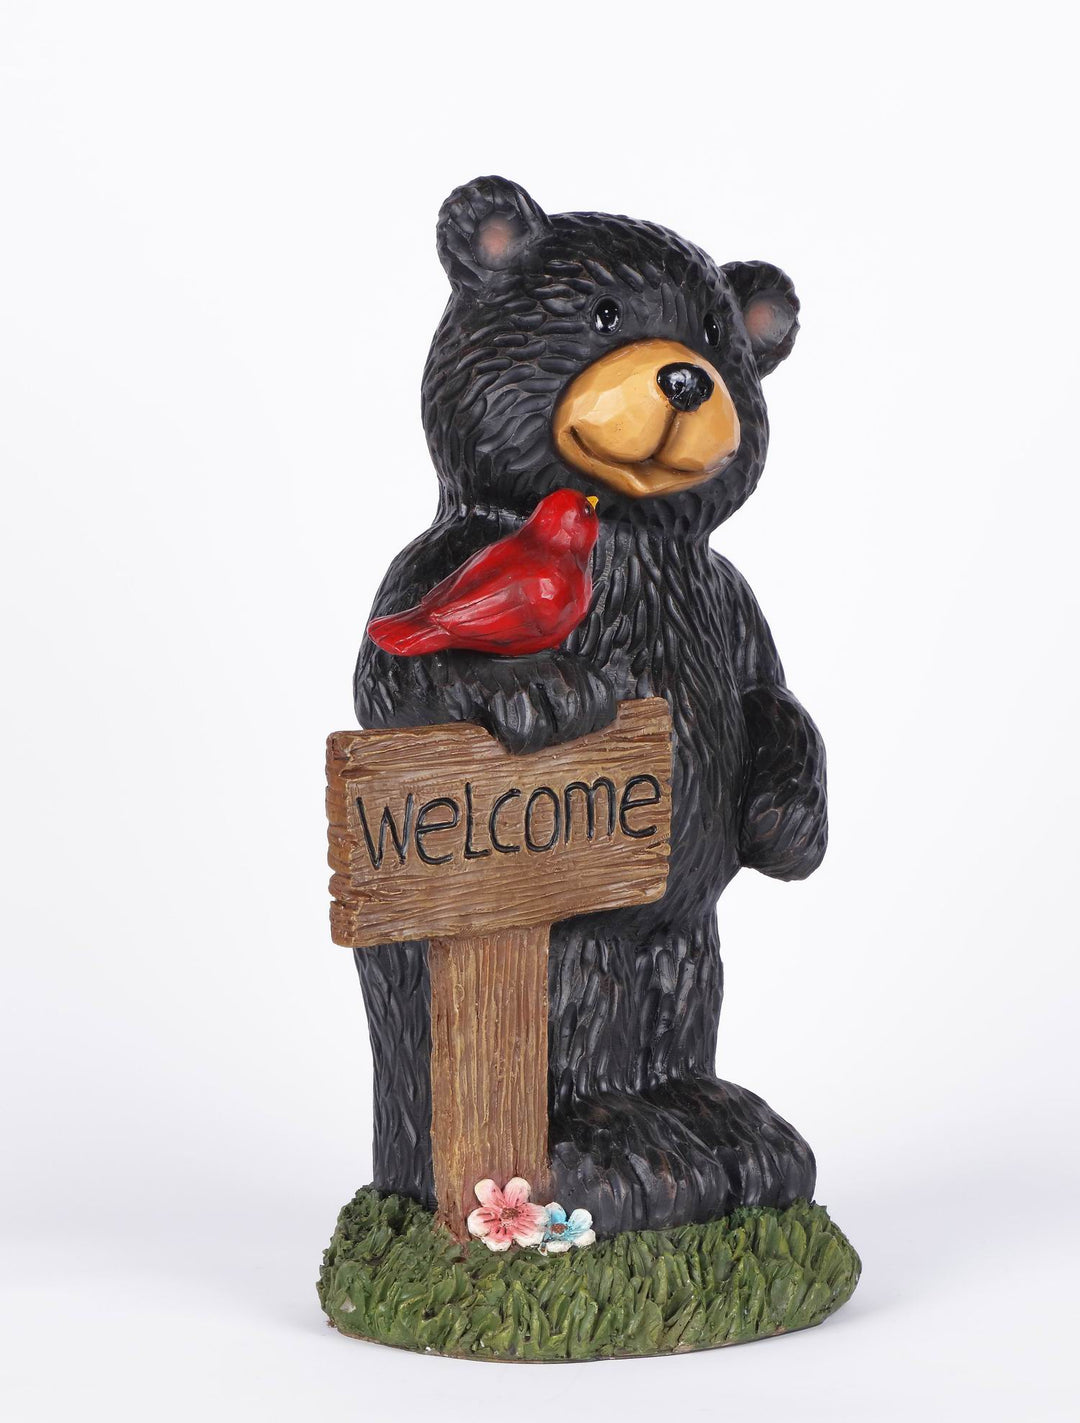 Black Bear Holding Welcome Sign with Red Sparrow Statue HI-LINE GIFT LTD.